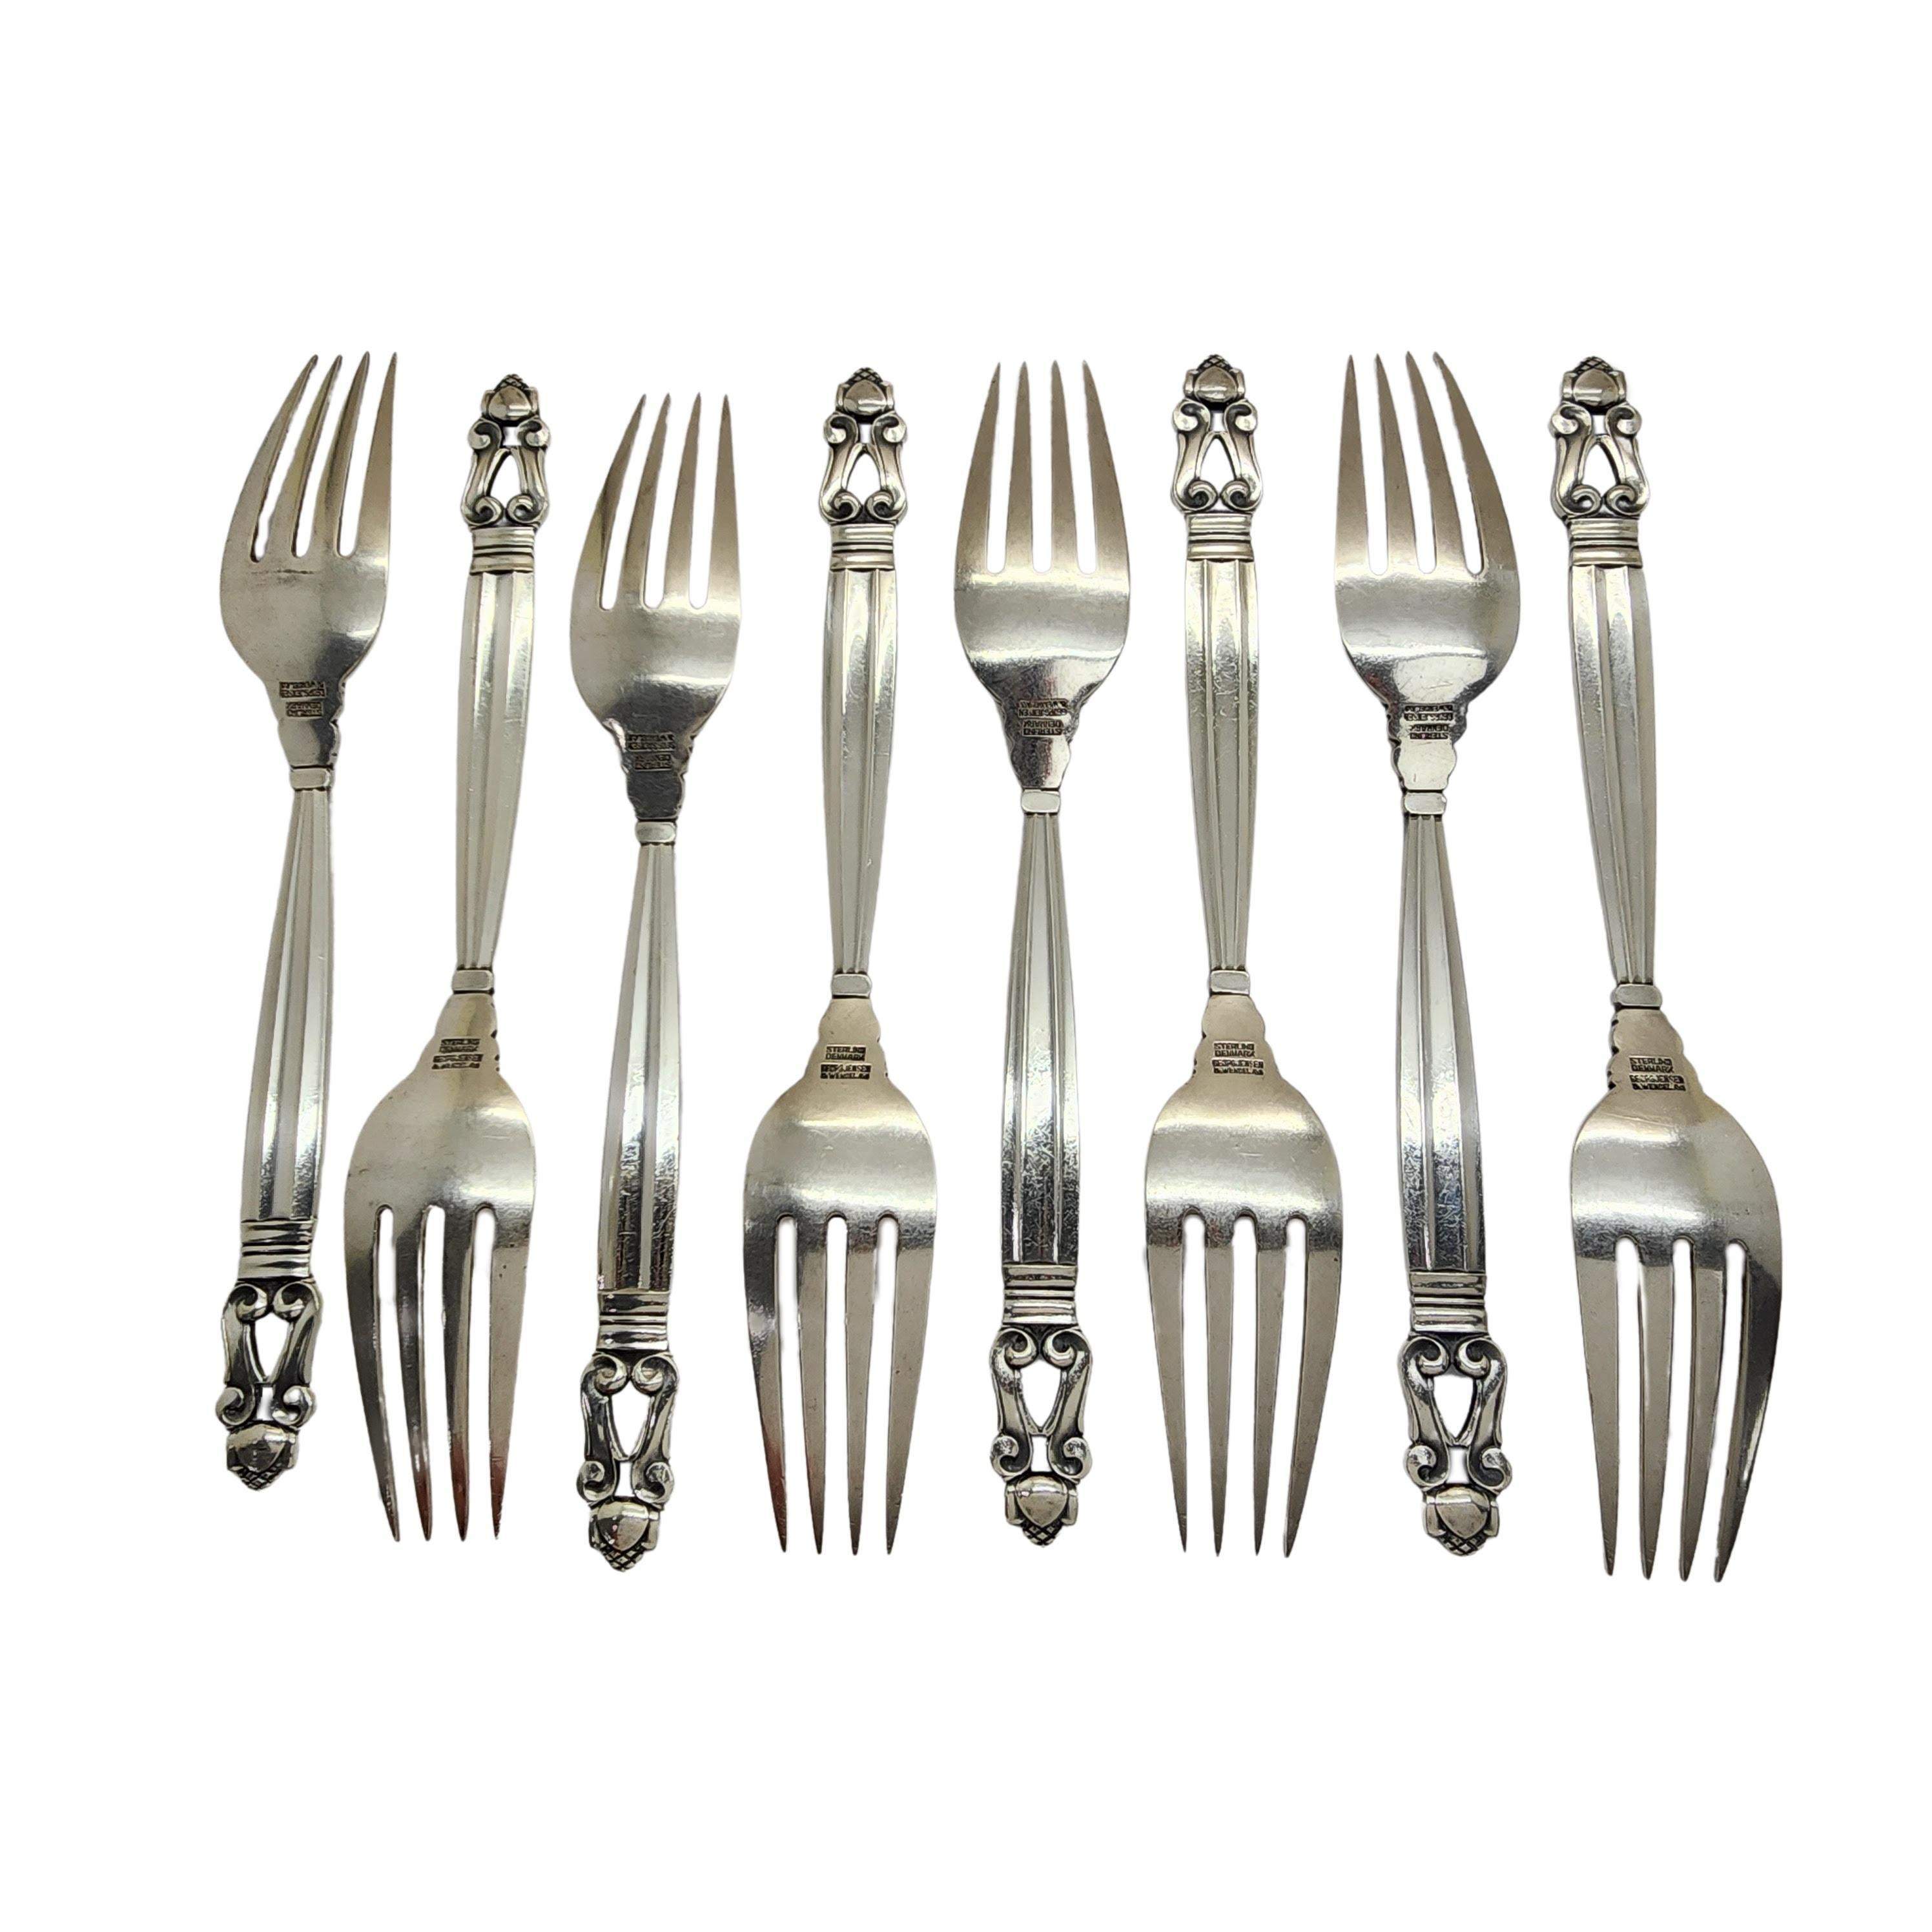 Set of 8 sterling silver dinner forks in the Acorn pattern by Georg Jensen.

The Acorn pattern was introduced in 1915 as a collaboration between Georg Jensen and designer Johan Ronde. The Acorn pattern, which combines Art Nouveau and Art Deco